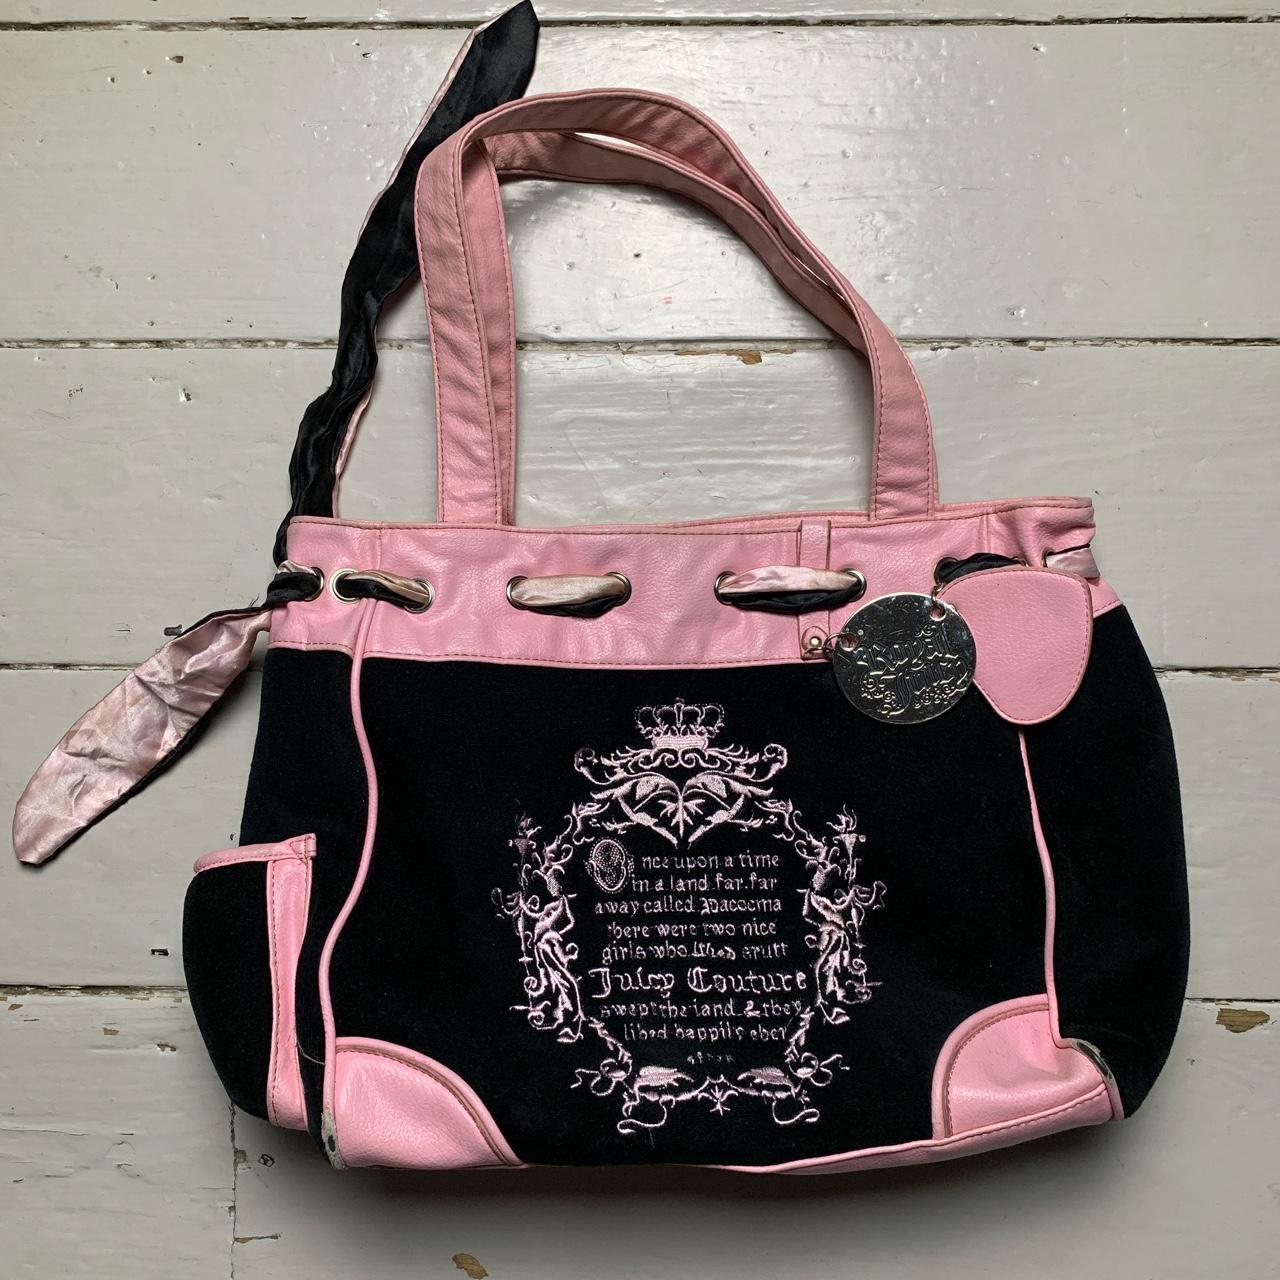 Juicy Couture Velour Bag Brown and Pink